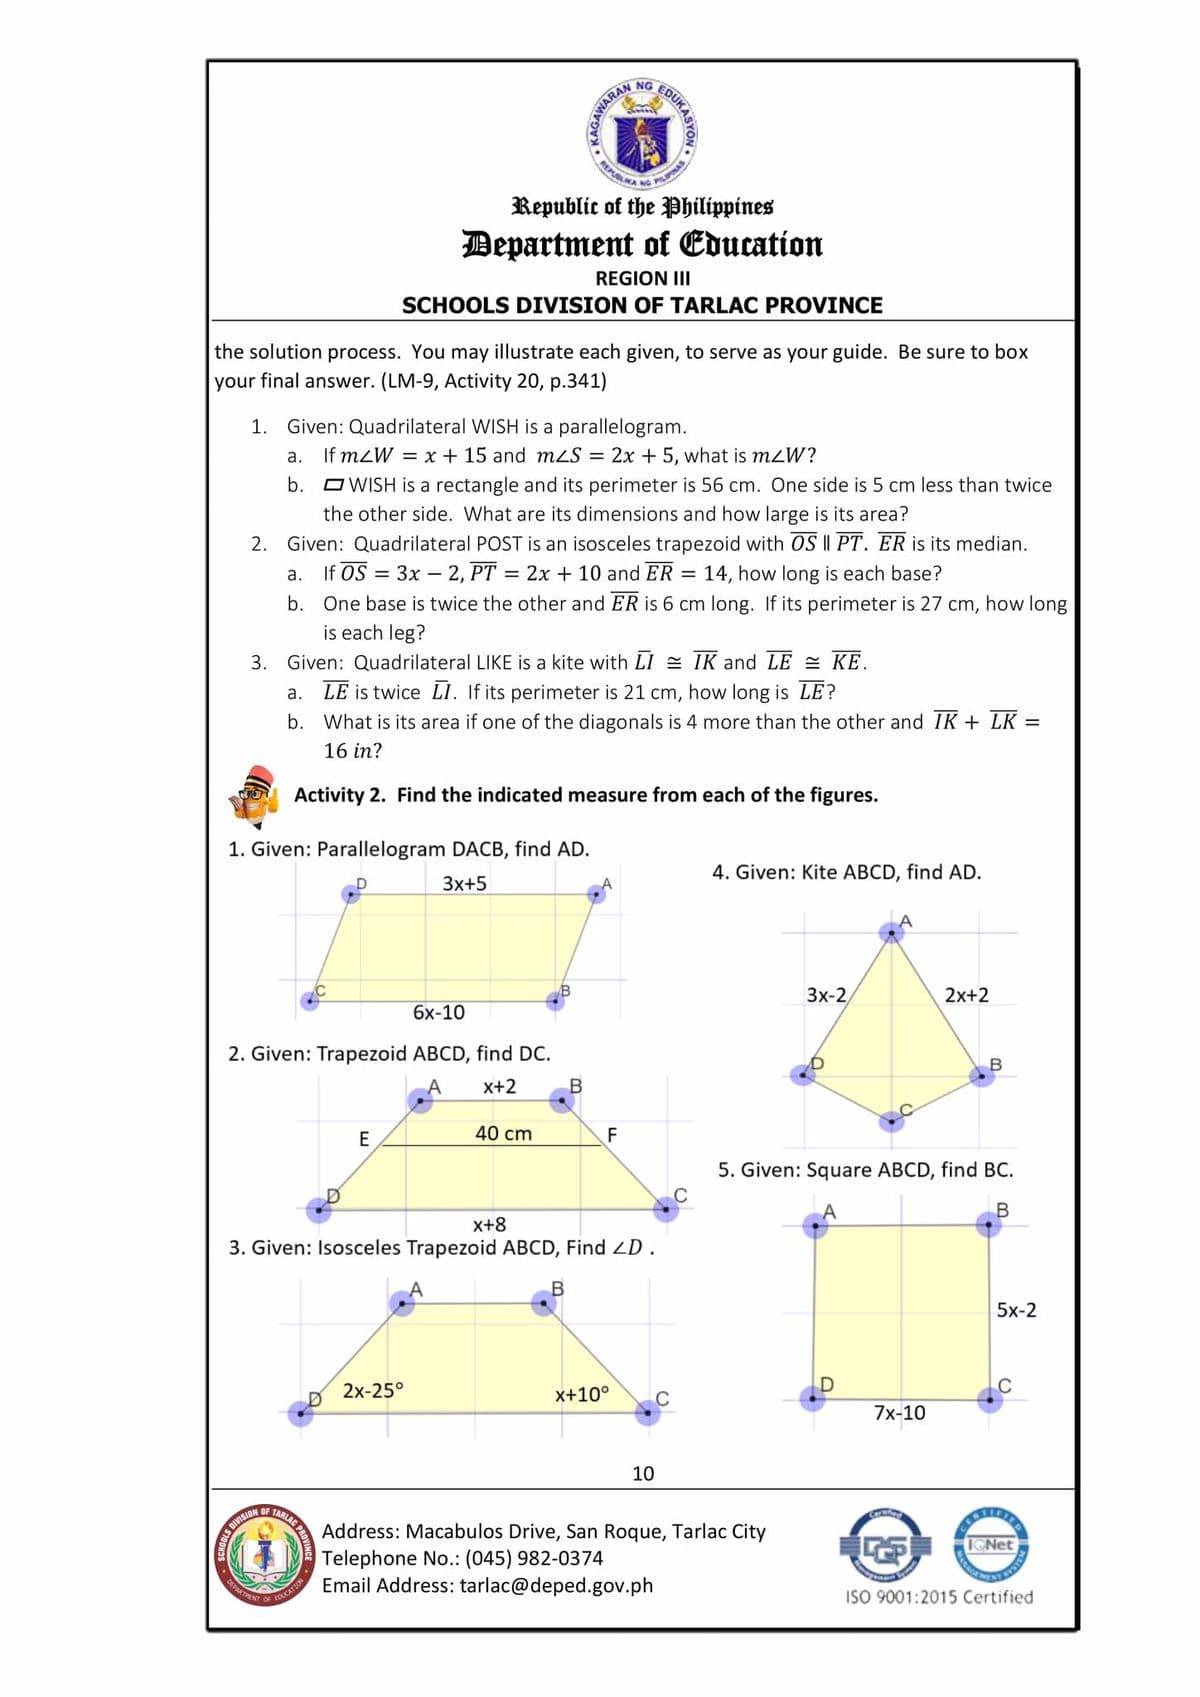 RENMA NG PILIPNAS
NG
NAS
Republic of the Philippines
Department of Education
REGION III
SCHOOLS DIVISION OF TARLAC PROVINCE
the solution process. You may illustrate each given, to serve as your guide. Be sure to box
your final answer. (LM-9, Activity 20, p.341)
1. Given: Quadrilateral WISH is a parallelogram.
а.
If mZW = x + 15 and mzS = 2x + 5, what is mzW?
b. OWISH is a rectangle and its perimeter is 56 cm. One side is 5 cm less than twice
the other side. What are its dimensions and how large is its area?
2. Given: Quadrilateral POST is an isosceles trapezoid with OS I| PT. ER is its median.
If OS = 3x – 2, PT = 2x + 10 and ER =
b. One base is twice the other and ER is 6 cm long. If its perimeter is 27 cm, how long
is each leg?
а.
14, how long is each base?
3. Given: Quadrilateral LIKE is a kite with LI = IK and LE = KE.
LE is twice LI. If its perimeter is 21 cm, how long is LE?
b. What is its area if one of the diagonals is 4 more than the other and IK + LK =
a.
16 in?
Activity 2. Find the indicated measure from each of the figures.
1. Given: Parallelogram DACB, find AD.
3x+5
4. Given: Kite ABCD, find AD.
6х-10
3x-2
2x+2
2. Given: Trapezoid ABCD, find DC.
B
x+2
E
40 cm
F
5. Given: Square ABCD, find BC.
x+8
3. Given: Isosceles Trapezoid ABCD, Find LD.
В
5x-2
2x-25°
x+10°
C
7x-10
10
OF
S DIVISION
Address: Macabulos Drive, San Roque, Tarlac City
Telephone No.: (045) 982-0374
Email Address: tarlac@deped.gov.ph
DEPARTENT
EDUCATION
OF
ISO 9001:2015 Certified
EOUKASYON
REM
KAGAWAR
MANAGA
TARLAG PAOVING
